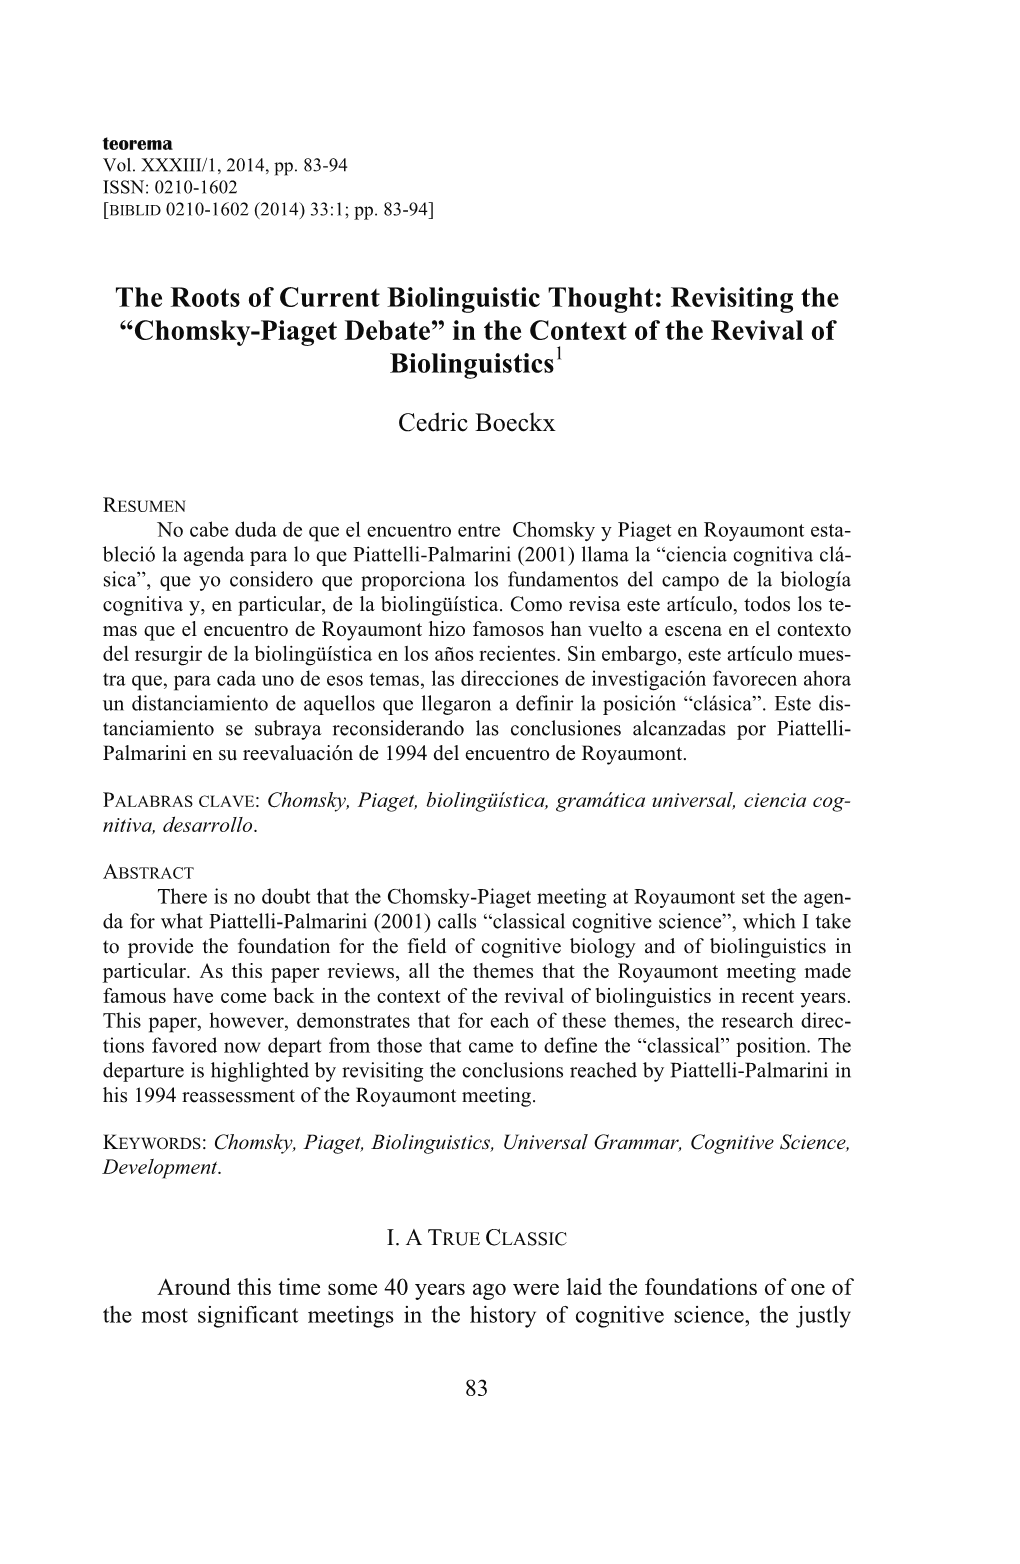 The Roots of Current Biolinguistic Thought: Revisiting the “Chomsky-Piaget Debate” in the Context of the Revival of Biolinguistics1